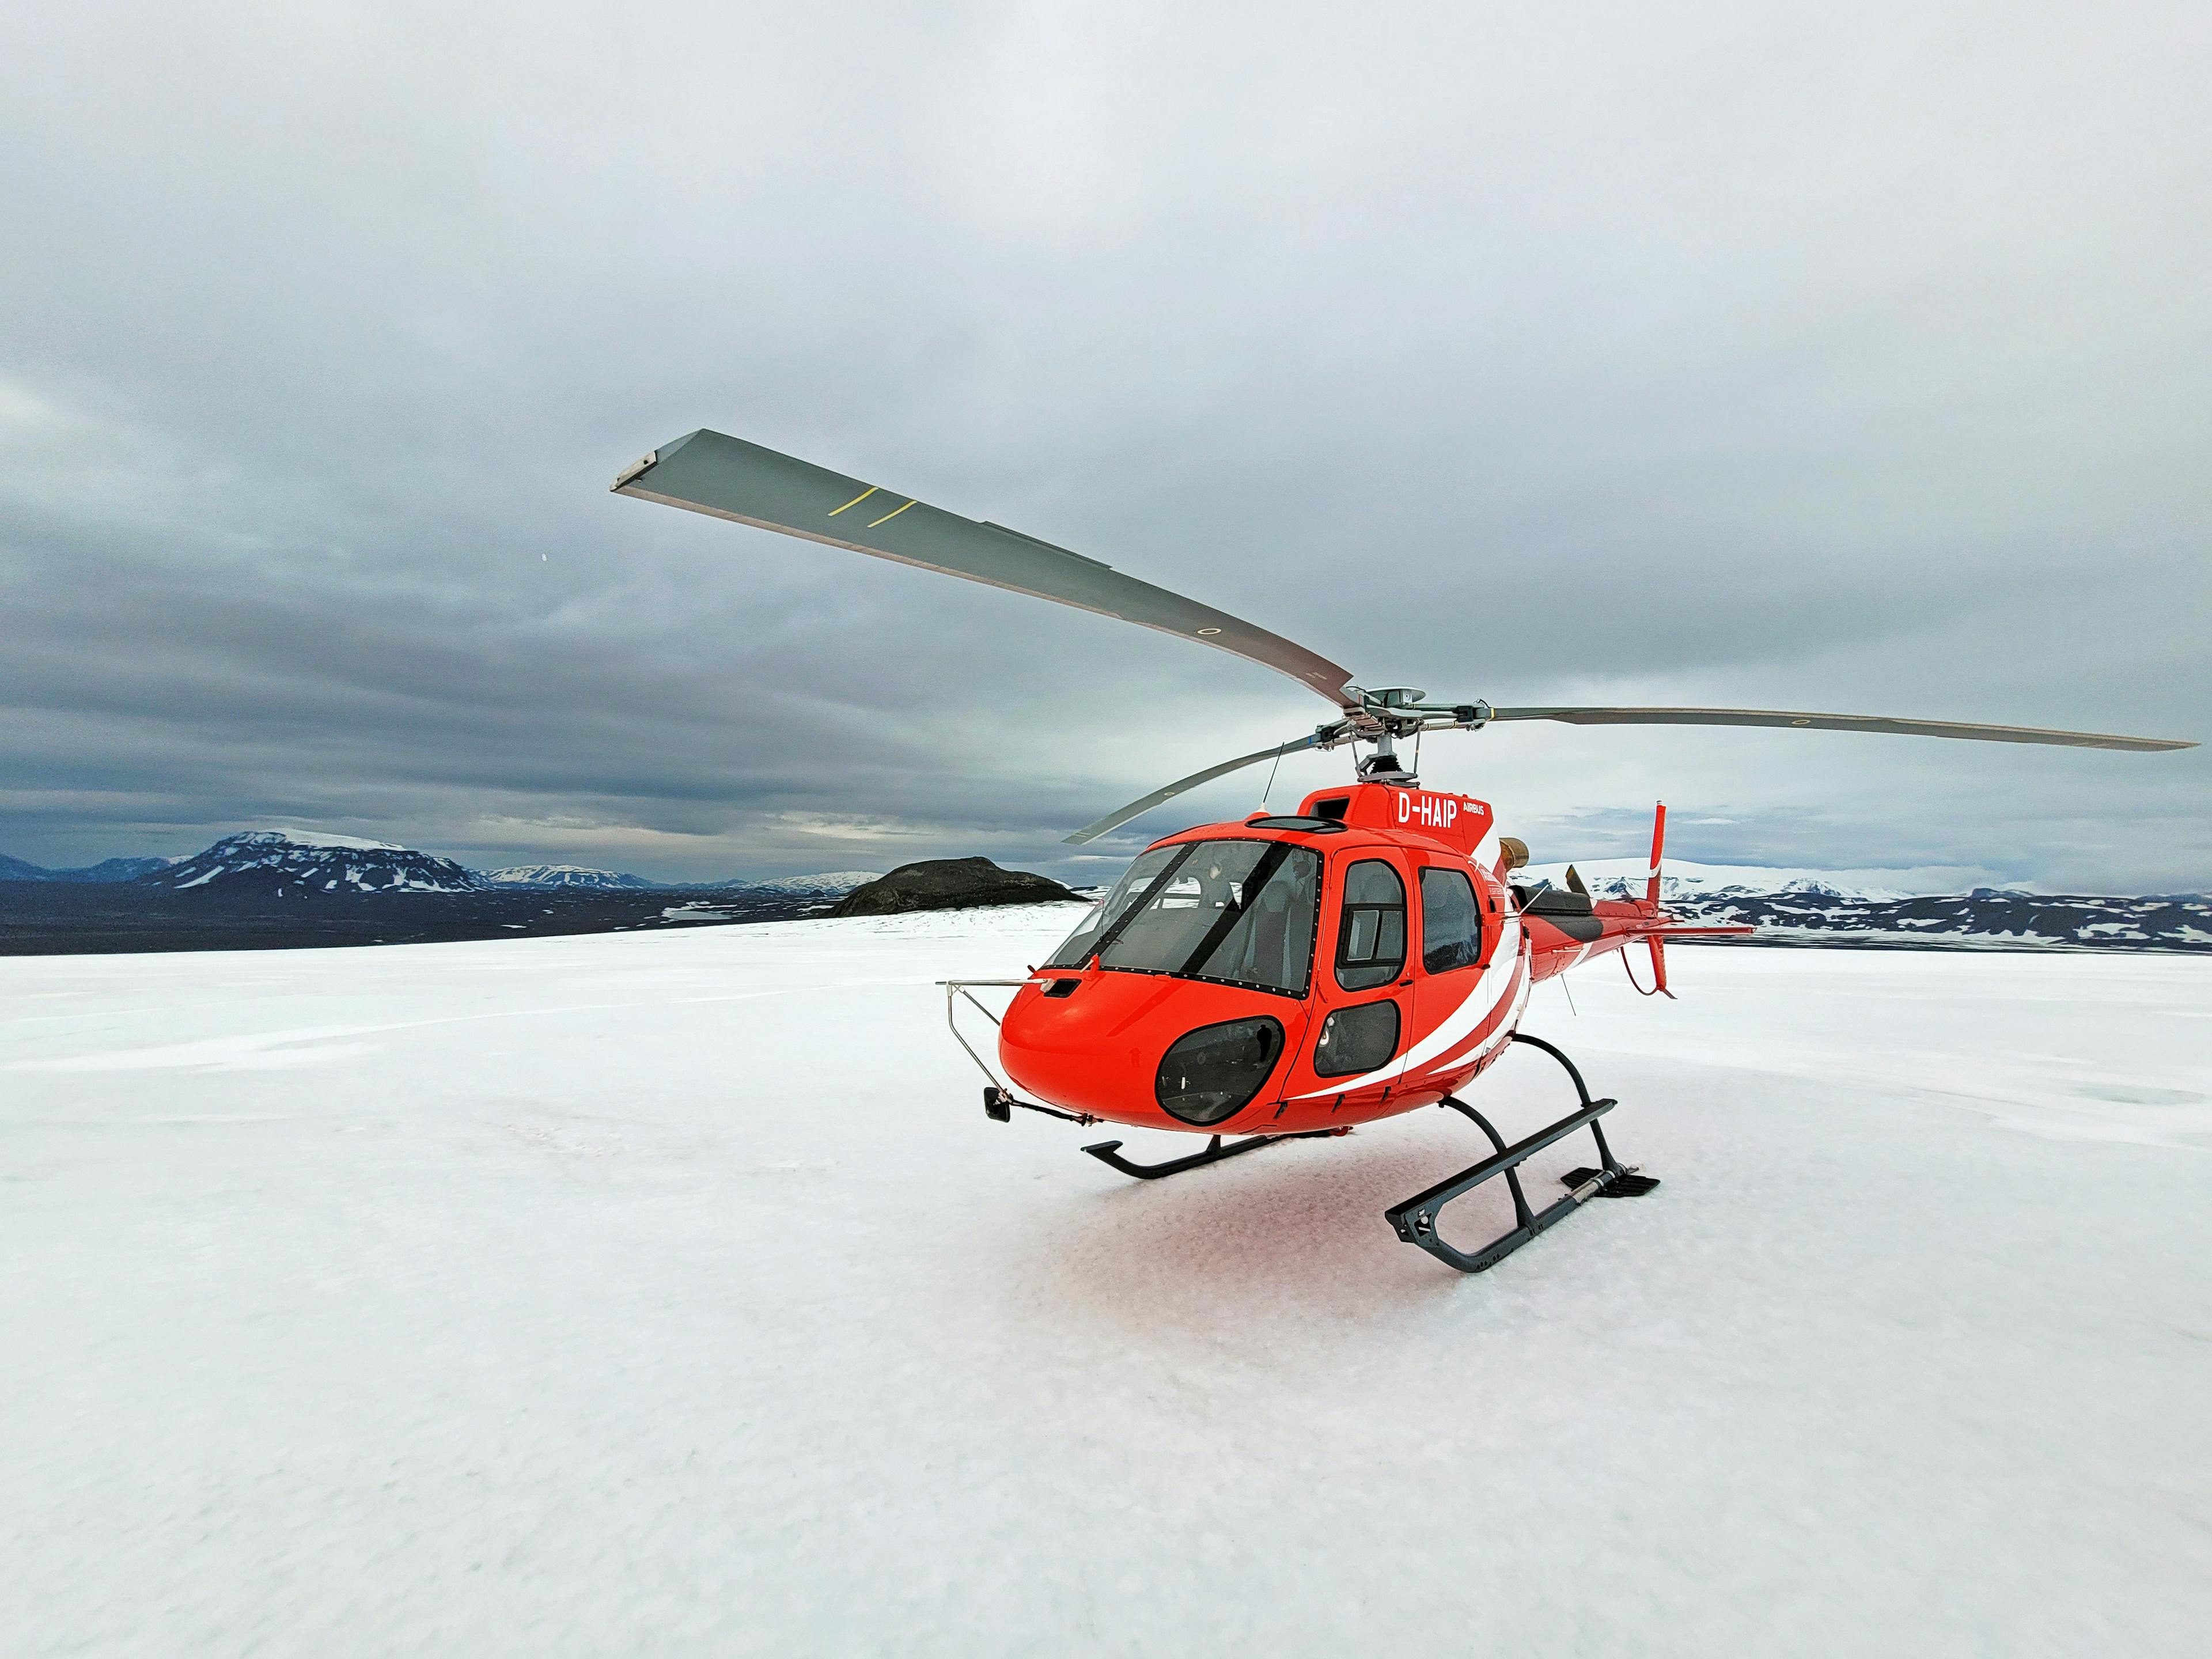 Waterfalls and glacier landing – Helicopter tour from Reykjavik